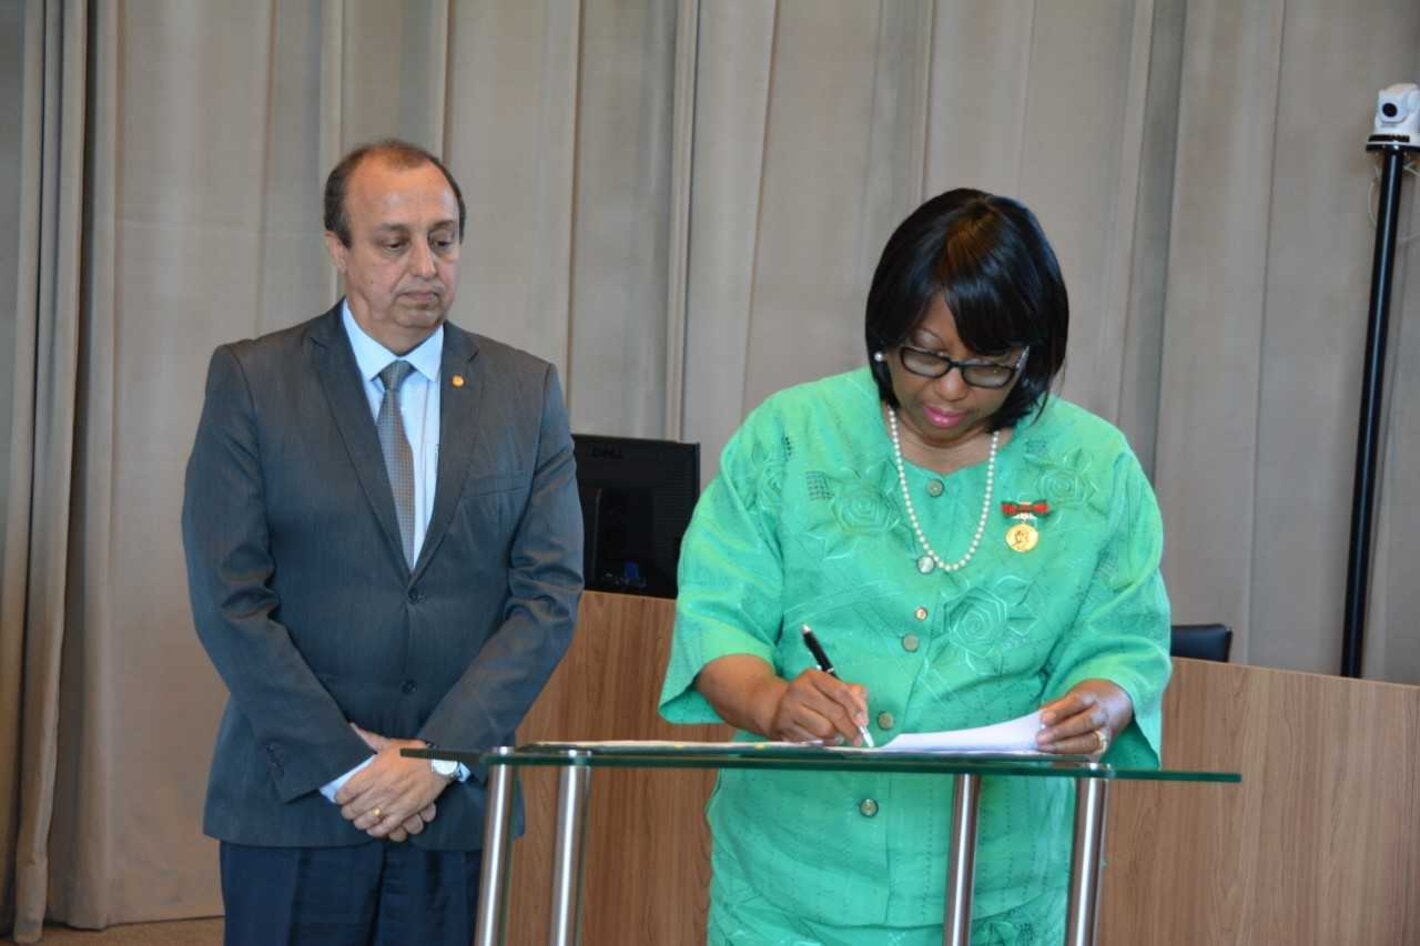 The Ministry of Health of Brazil, the Ministry of Public Health of Pará, and PAHO/WHO sign agreements on March 13 to improve basic care and health management.